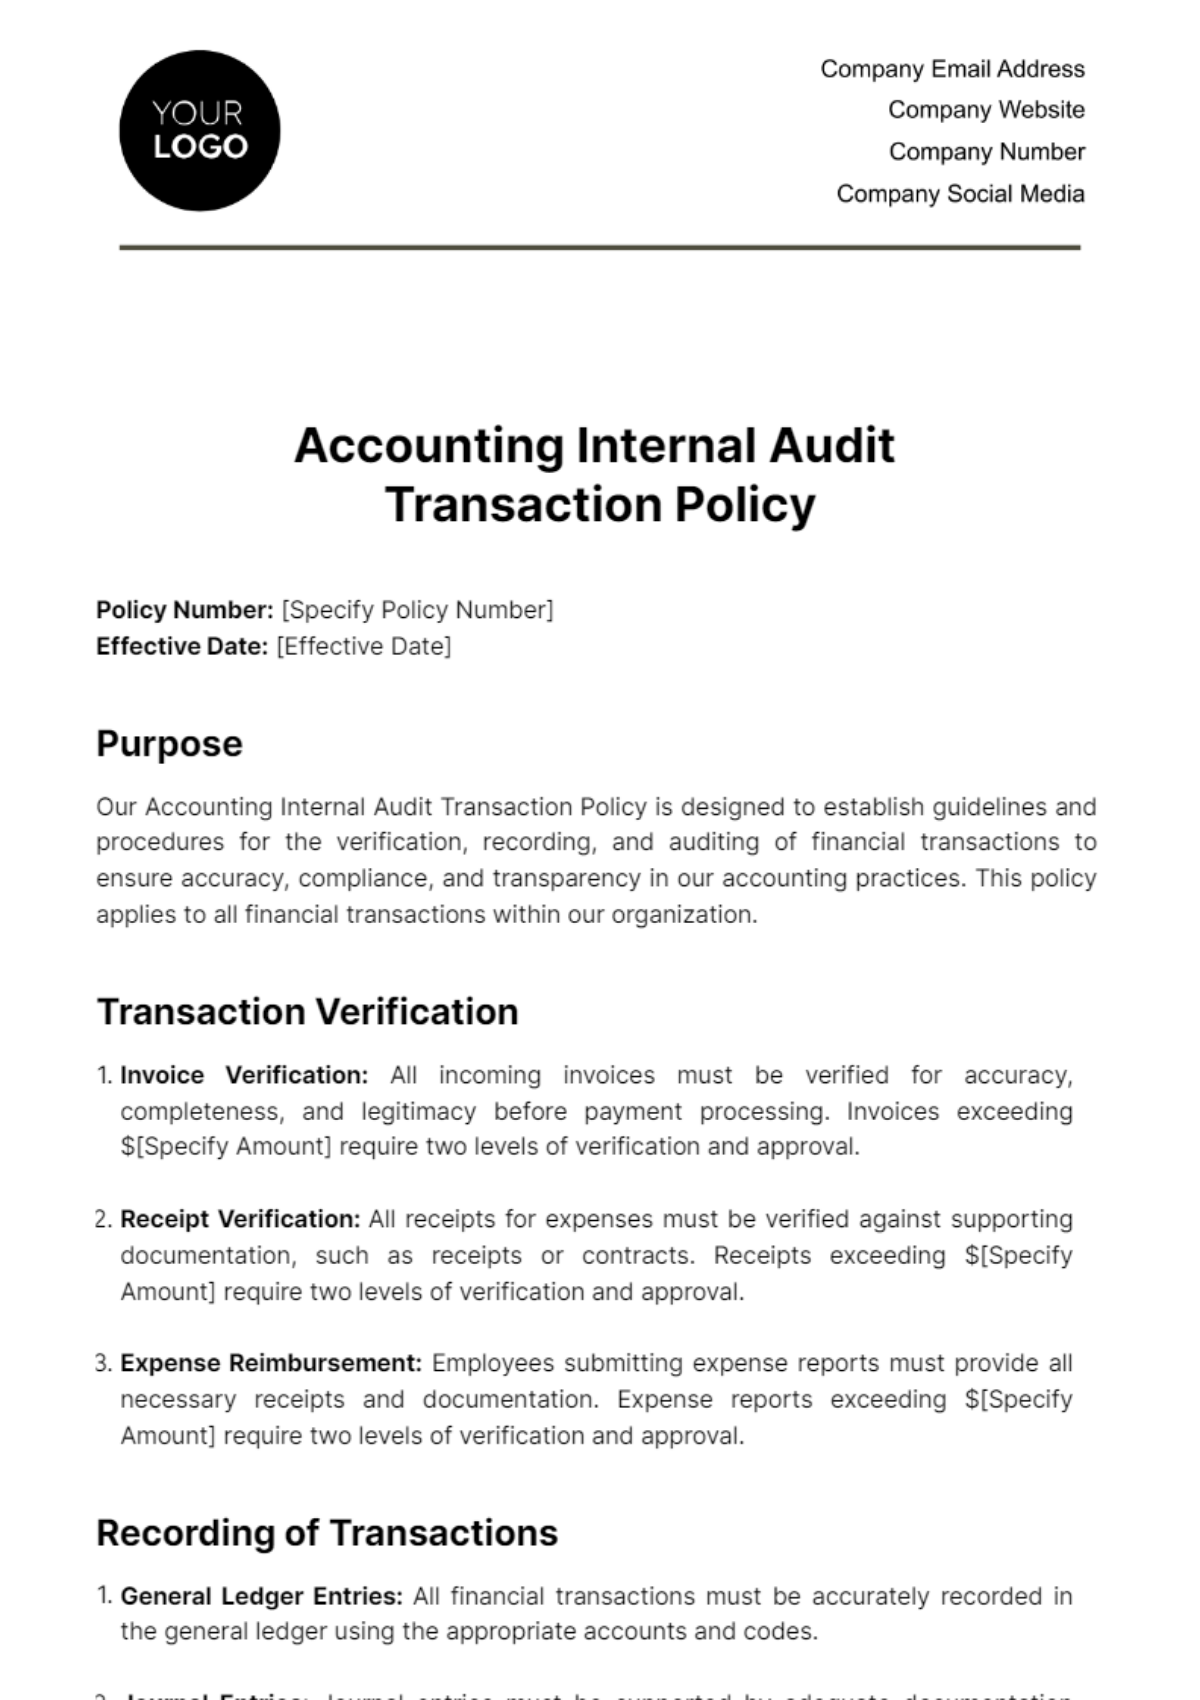 Free Accounting Internal Audit Transaction Policy Template